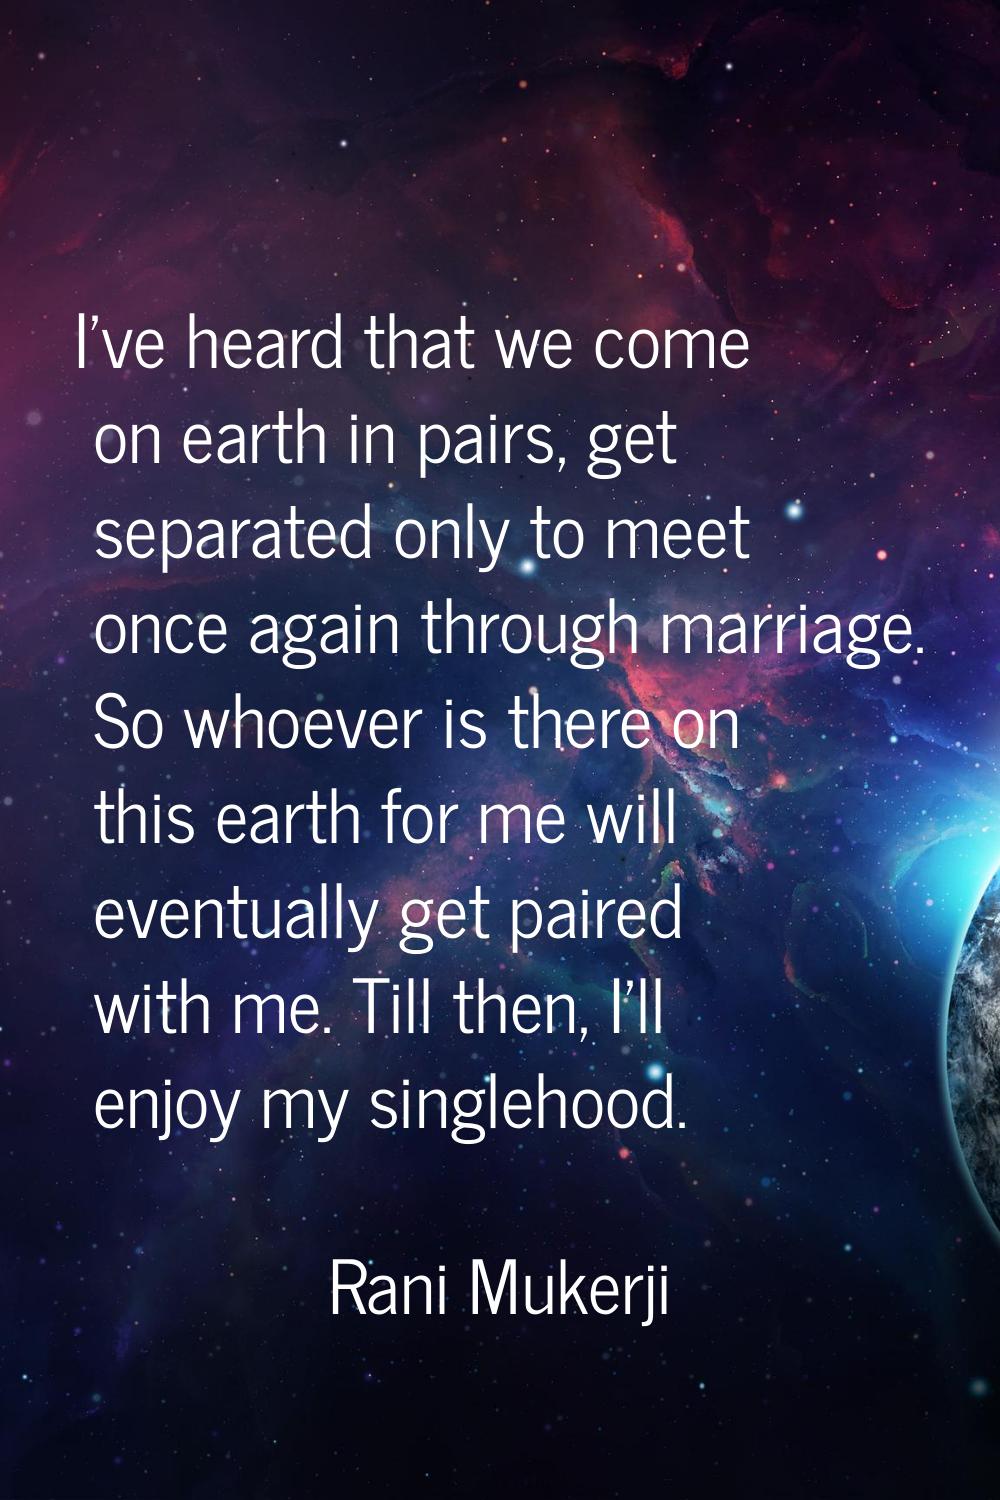 I've heard that we come on earth in pairs, get separated only to meet once again through marriage. 